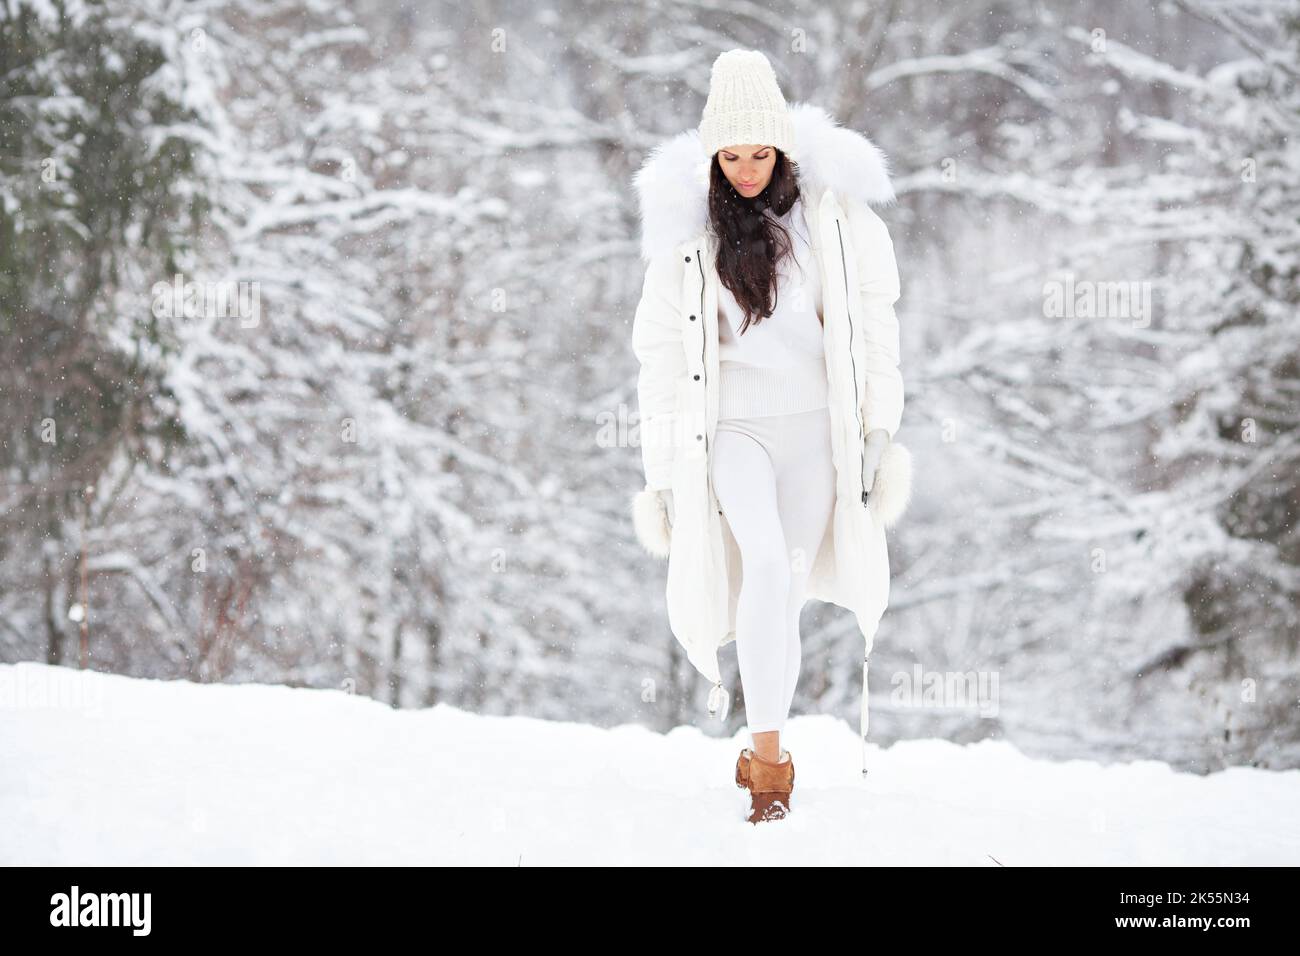 https://c8.alamy.com/comp/2K55N34/beautiful-woman-wearing-fashionable-winter-clothes-white-down-jacket-knitted-stylish-hat-sweater-leggings-mittens-felt-boots-outdoors-female-s-2K55N34.jpg